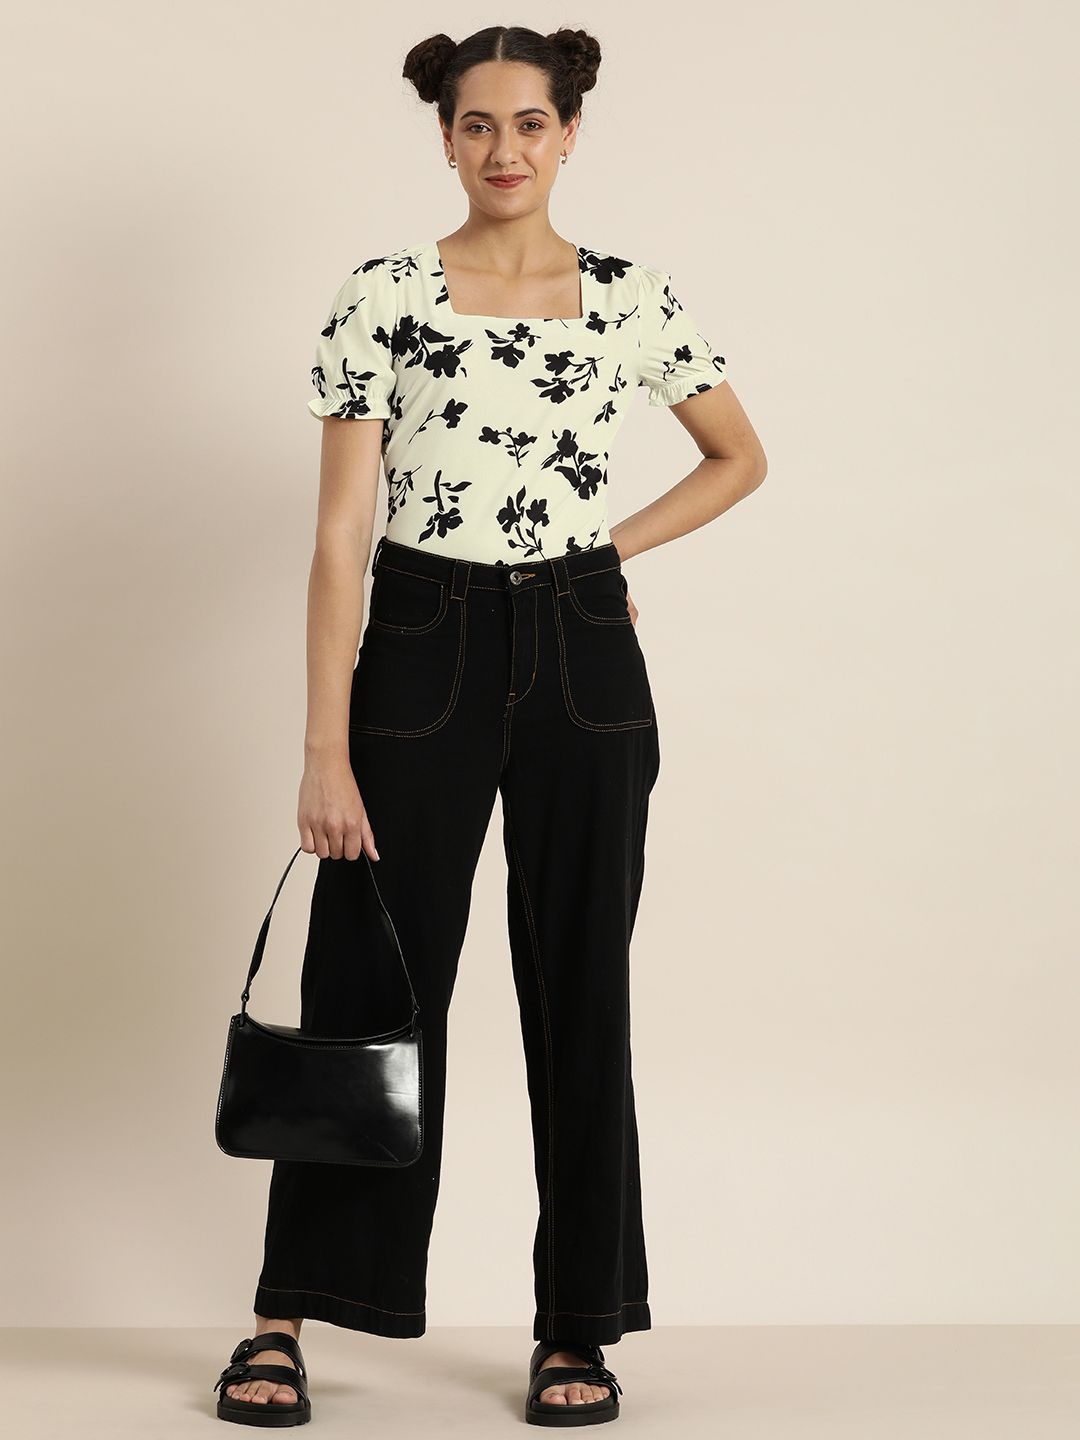 encore by INVICTUS White & Black Floral Printed Regular Top Price in India